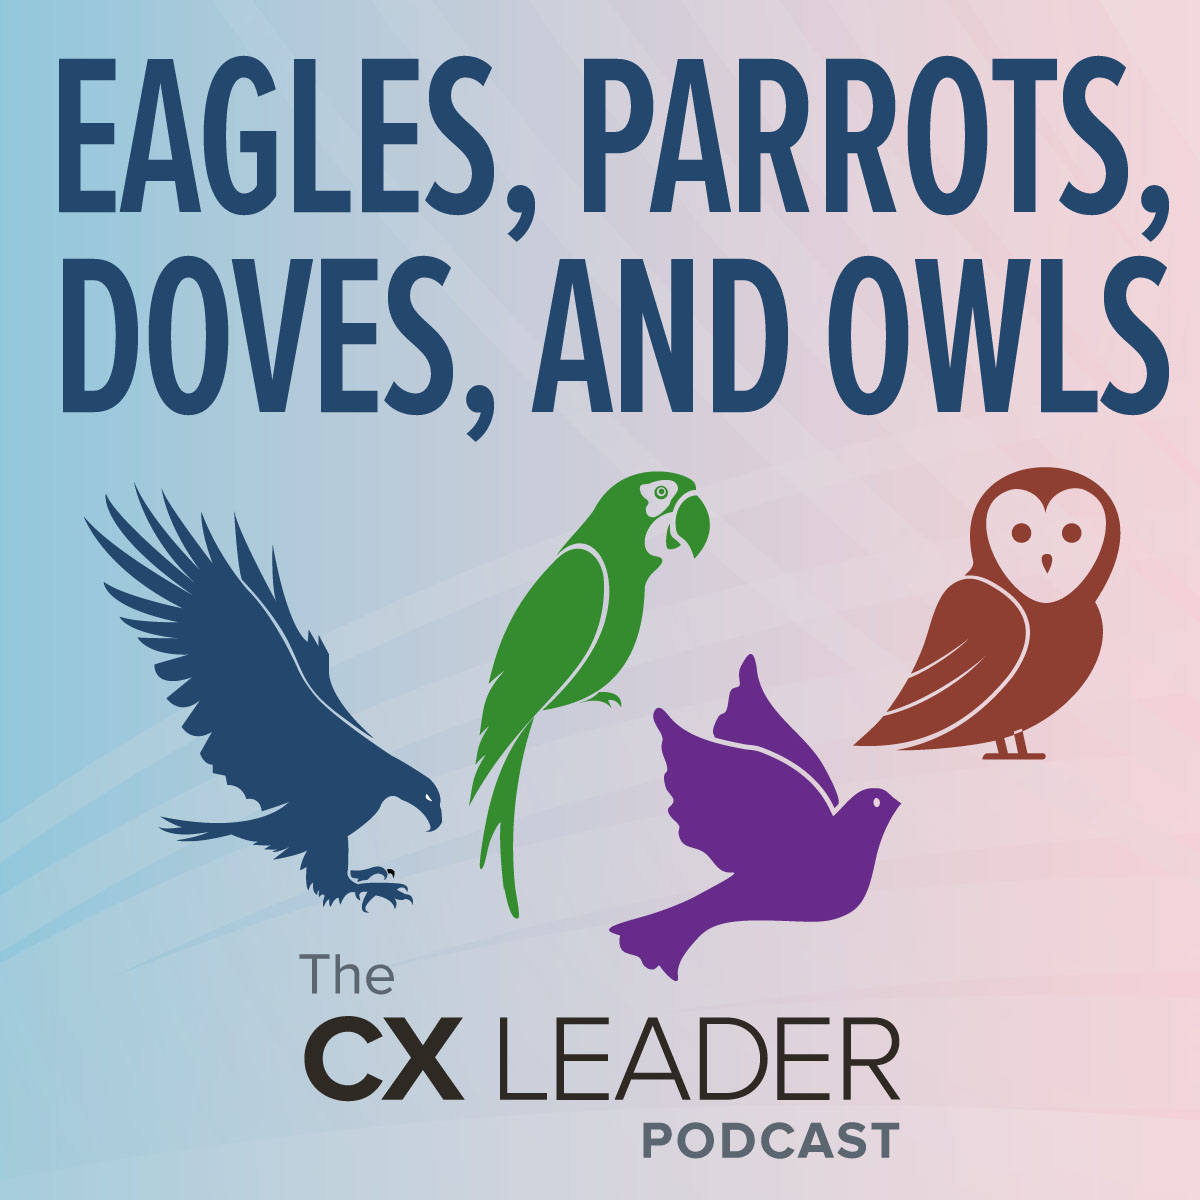 Eagles, Parrots, Doves, and Owls